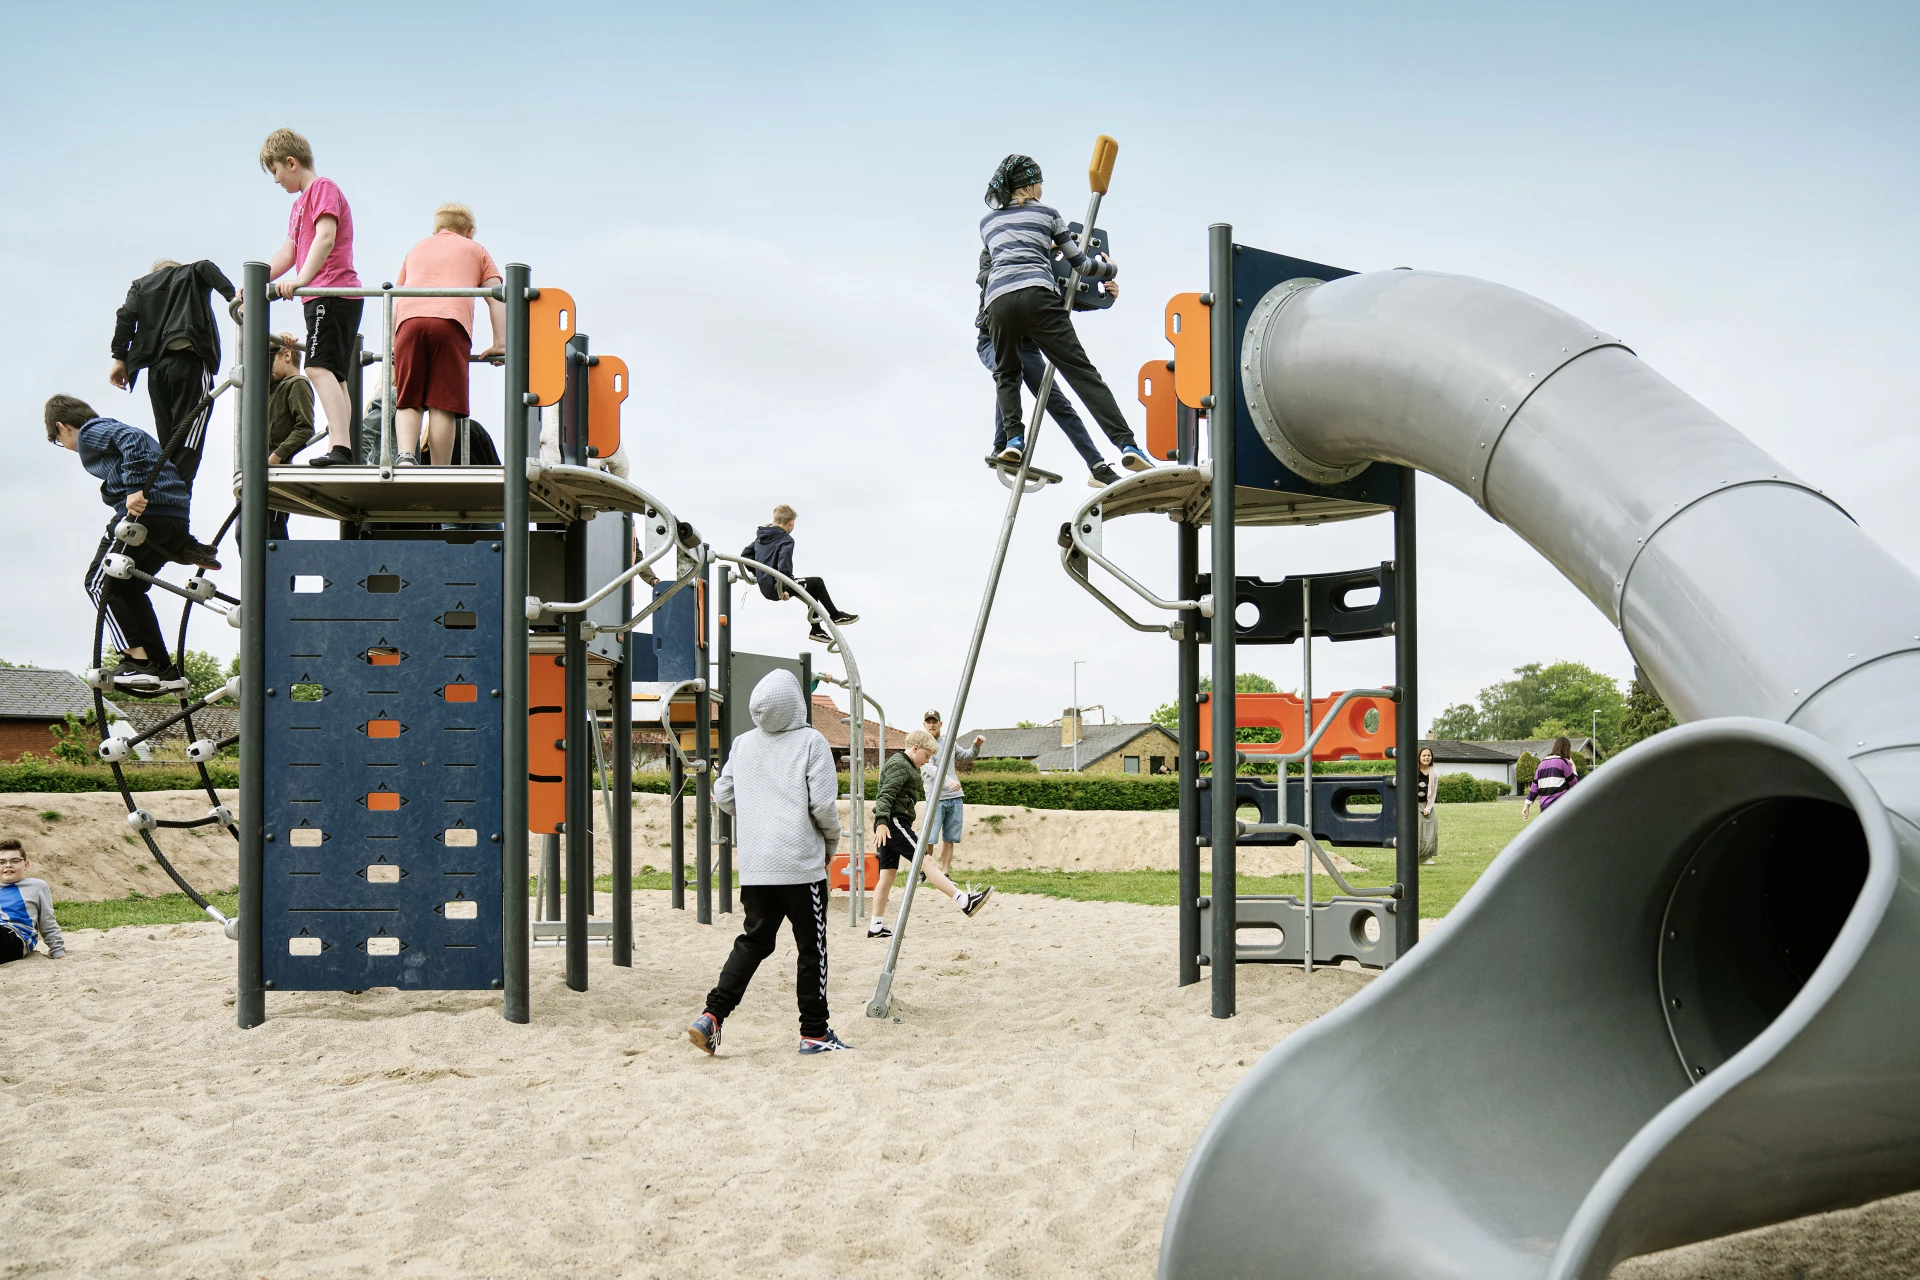 children playing on a KOMPAN playground with cliff rider